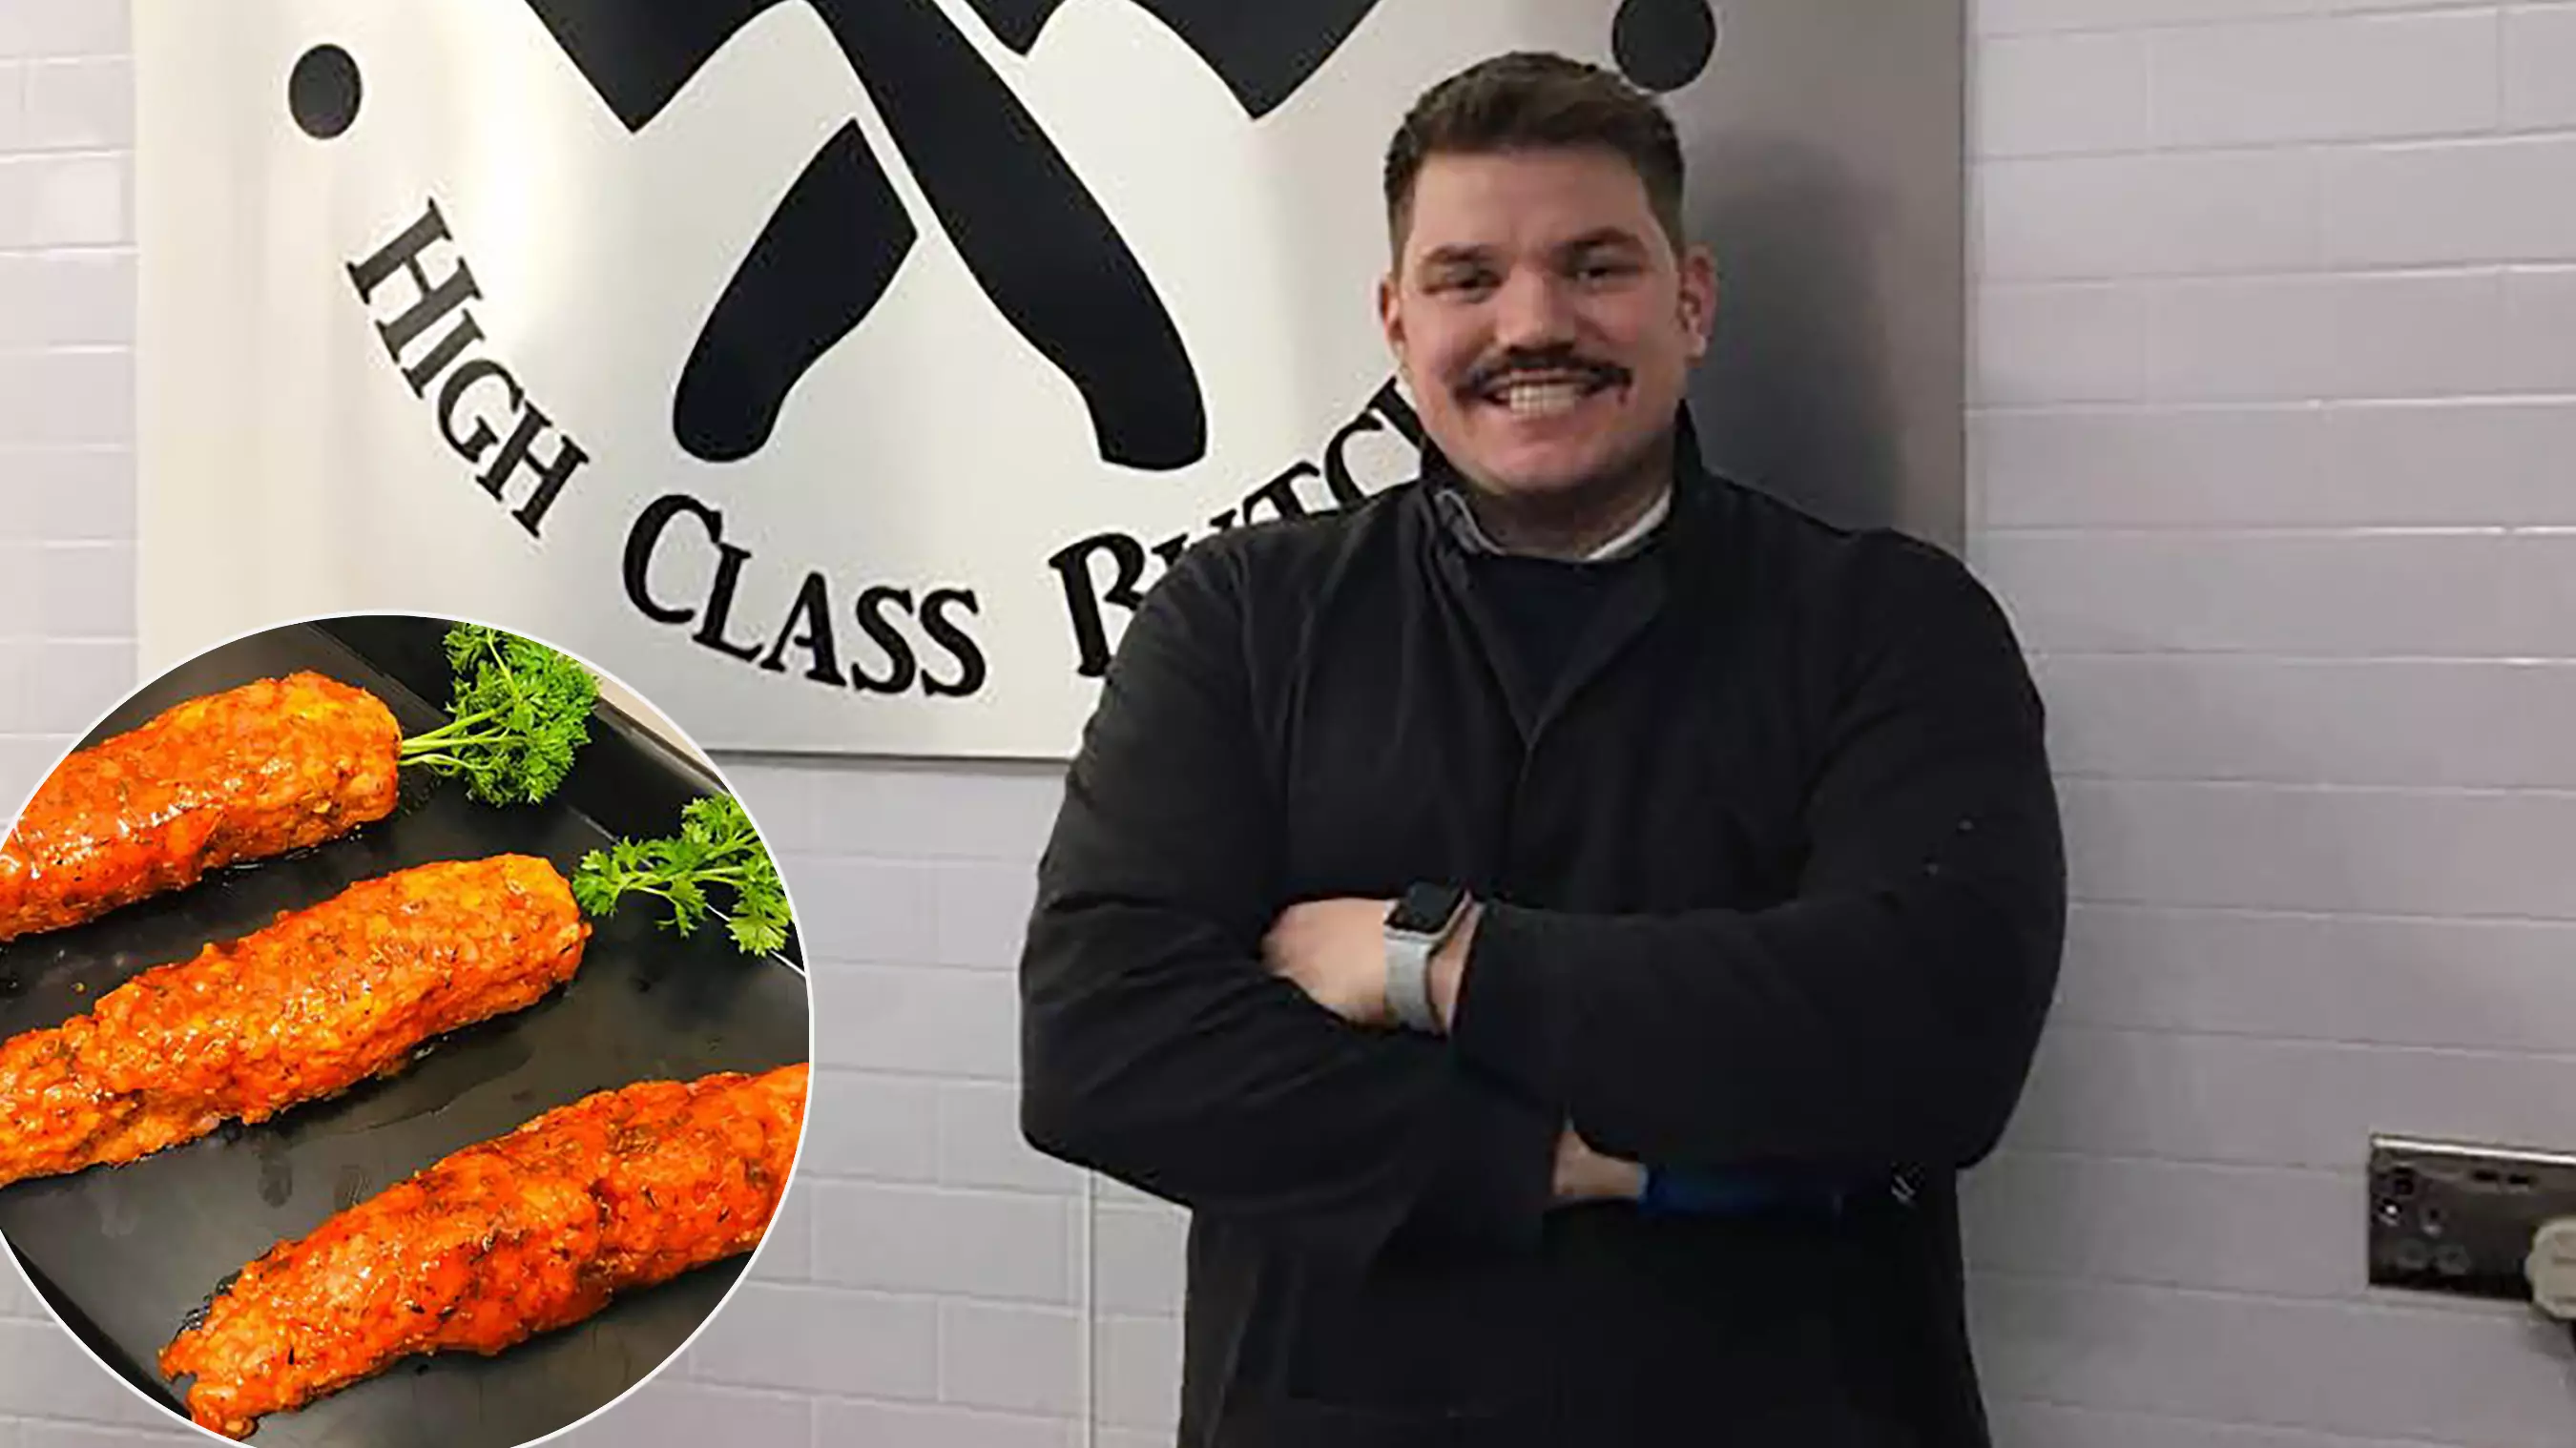 Butcher Trolls Vegans With 'Carrots' Made From Pork